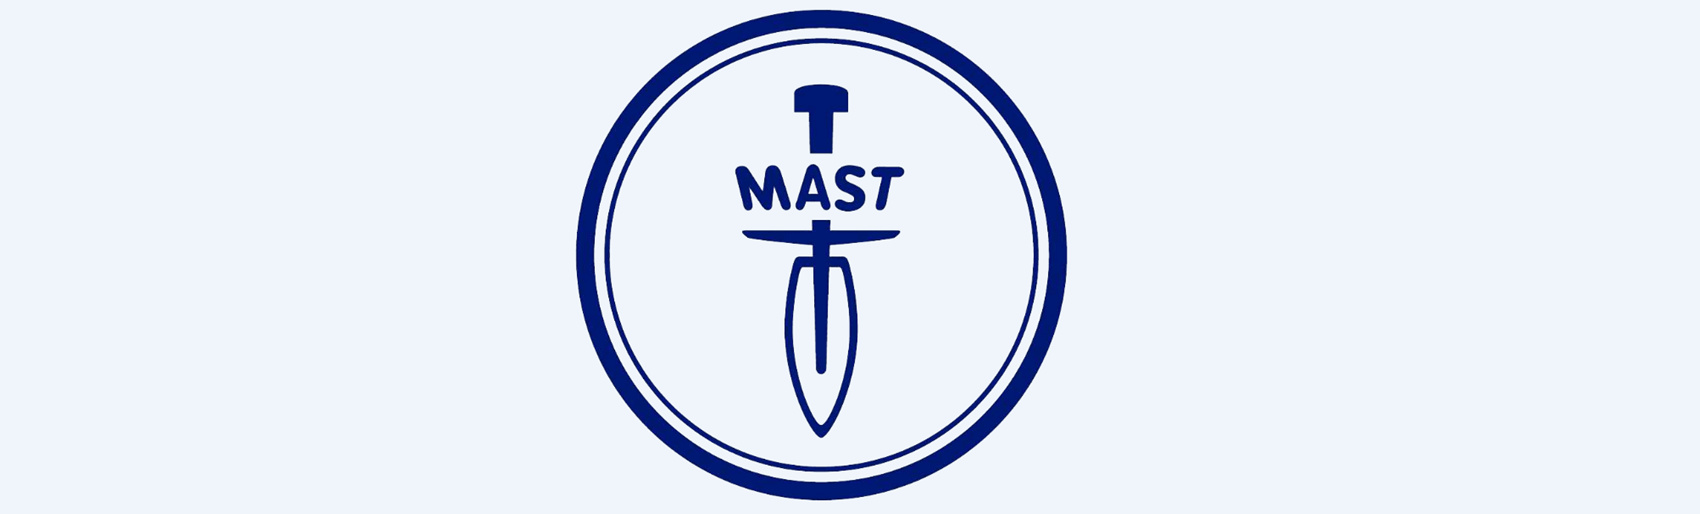 Mast climbing for shorthanded crews  Yachting Monthly